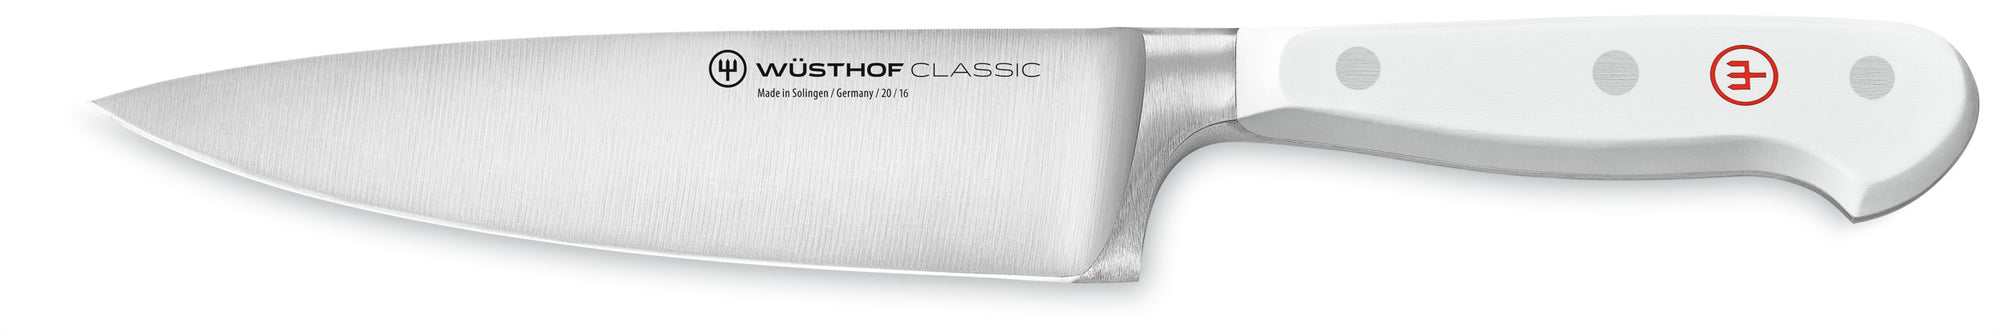 Wusthof Classic White Cook's Knife, 6-inch (16 cm) - 1040200116 Canada